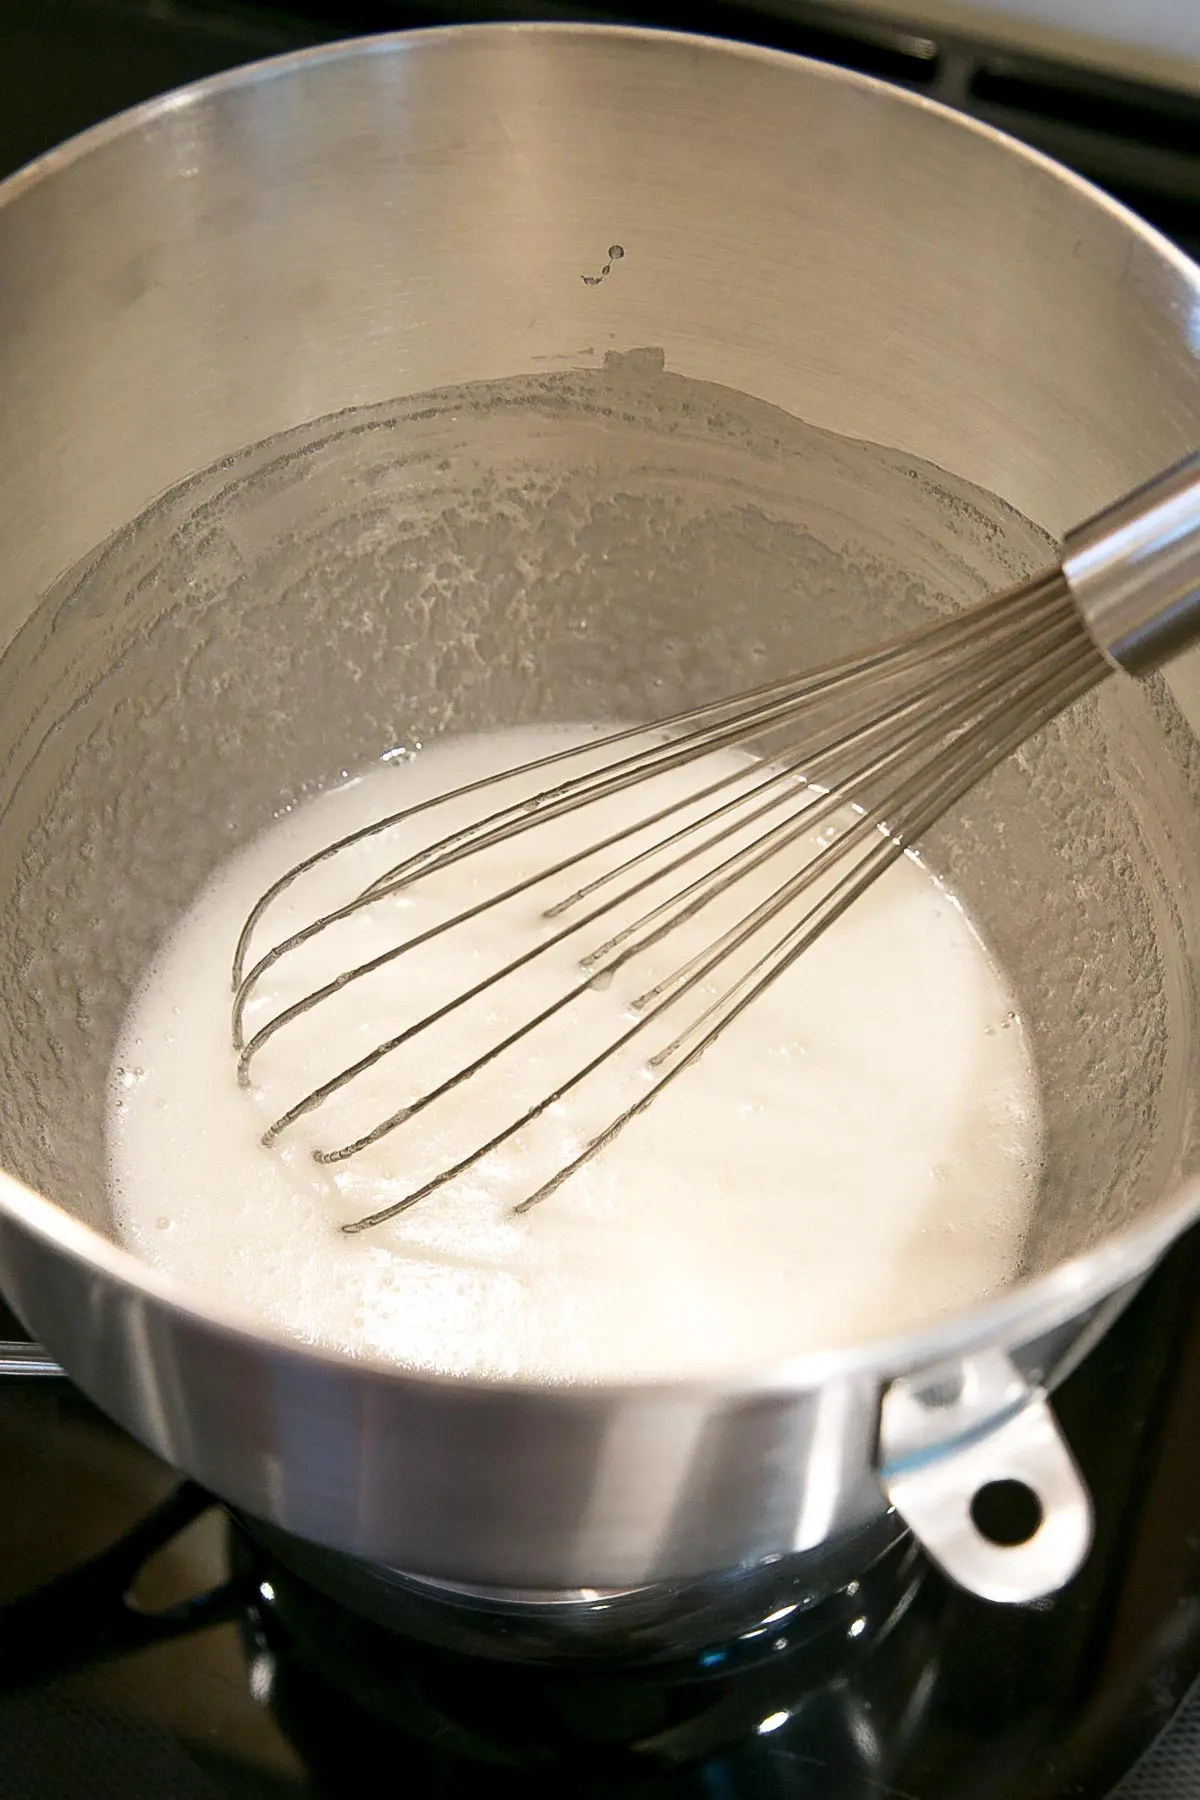 Whisking egg whites and sugar in a bowl over a simmering pot of water.